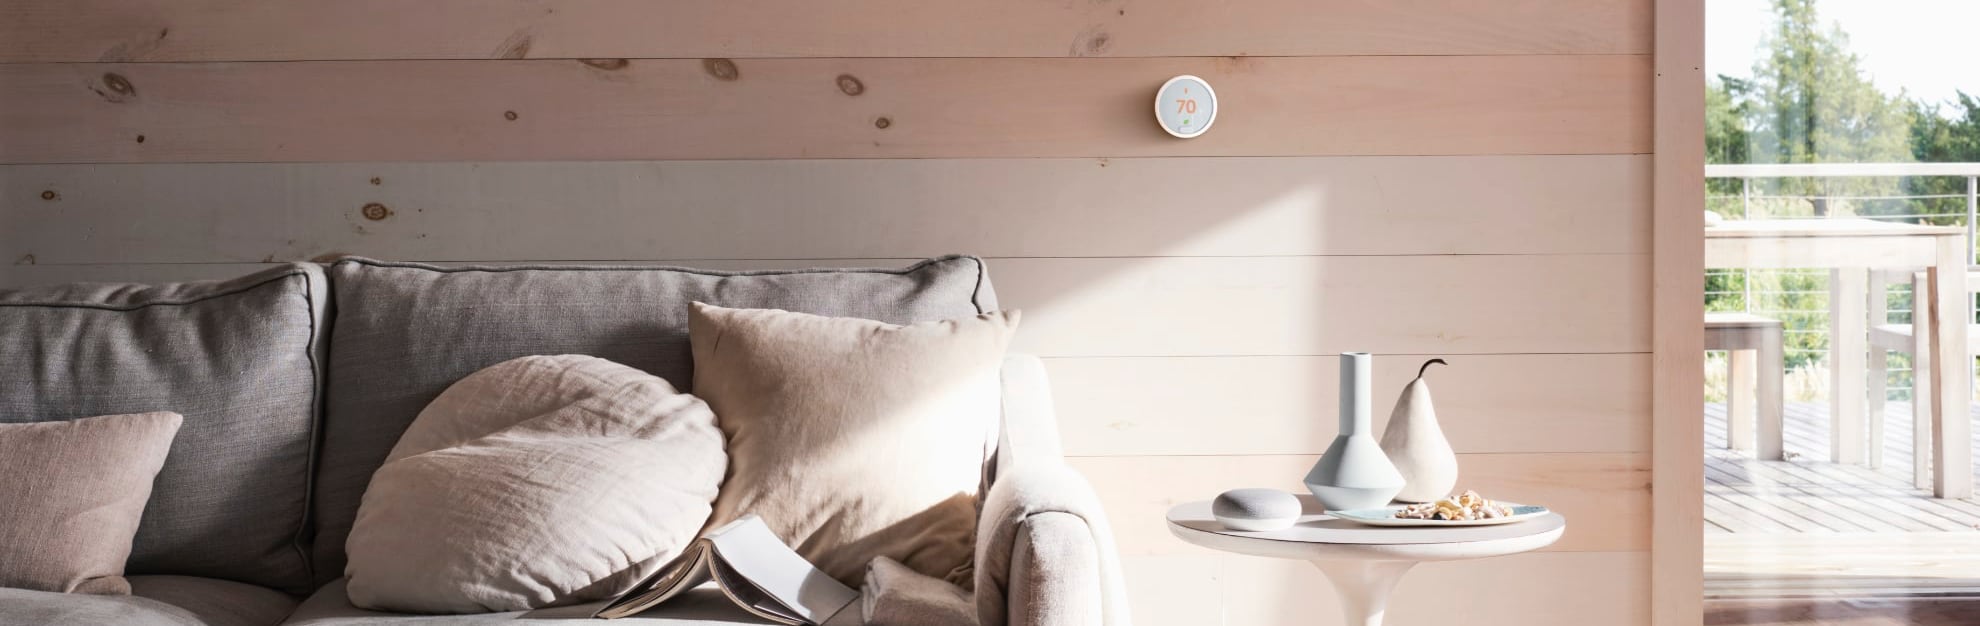 Vivint Home Automation in Mobile